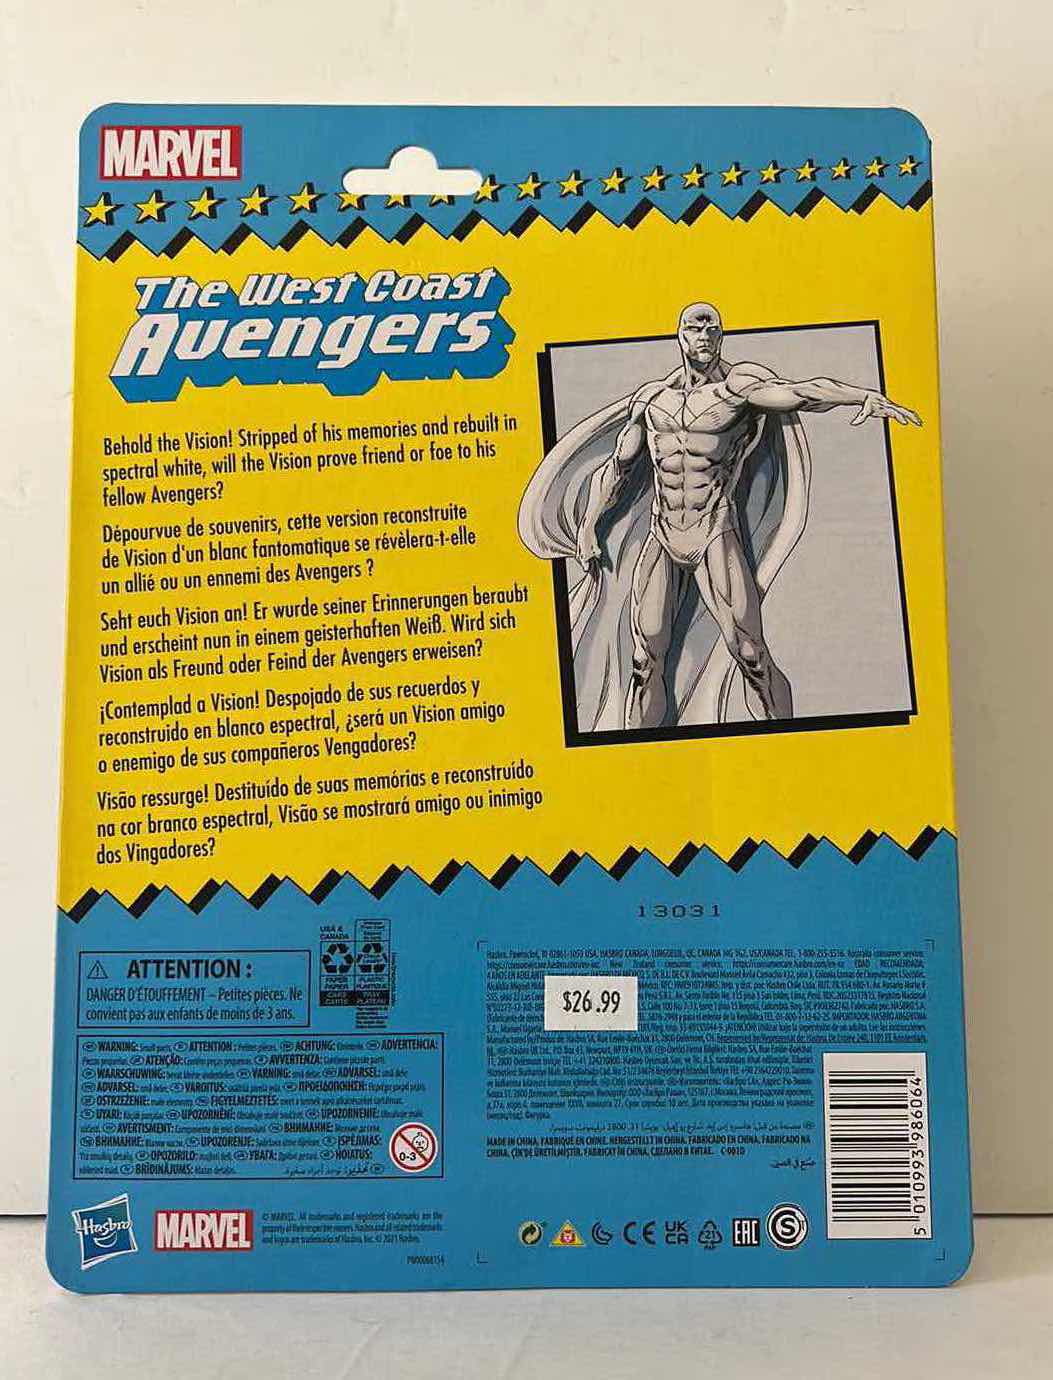 Photo 2 of BRAND NEW HASBRO MARVEL THE WEST COAST AVENGERS “VISION” ACTION FIGURE $27